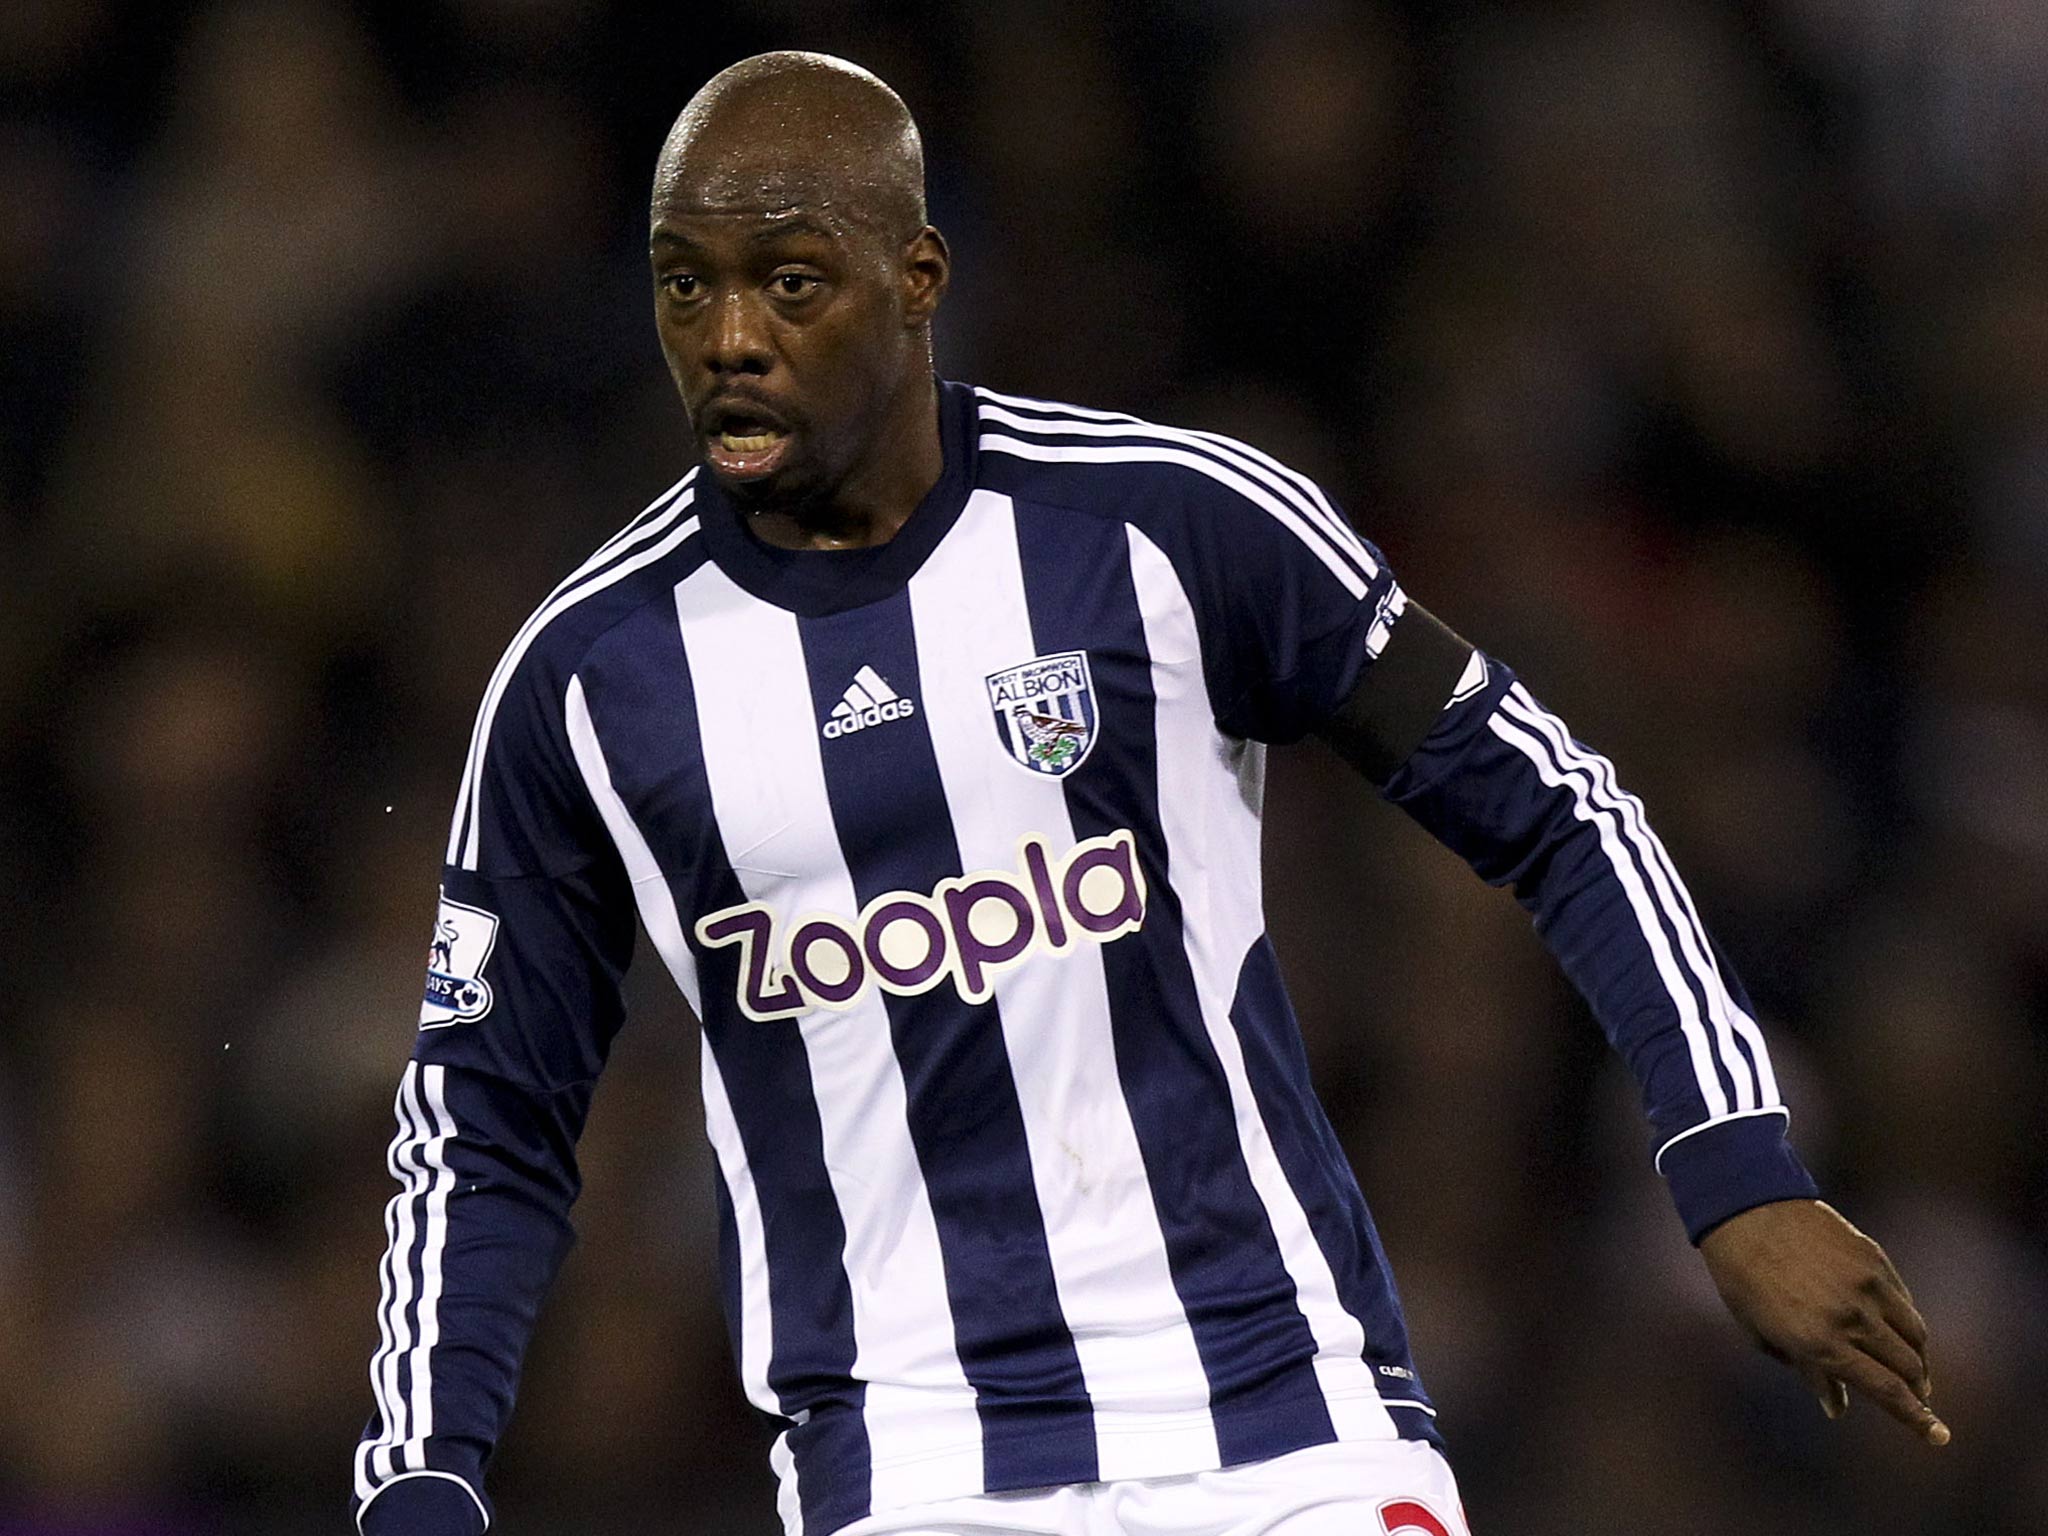 Youssouf Mulumbu has played in all 13 league games for West Brom this season